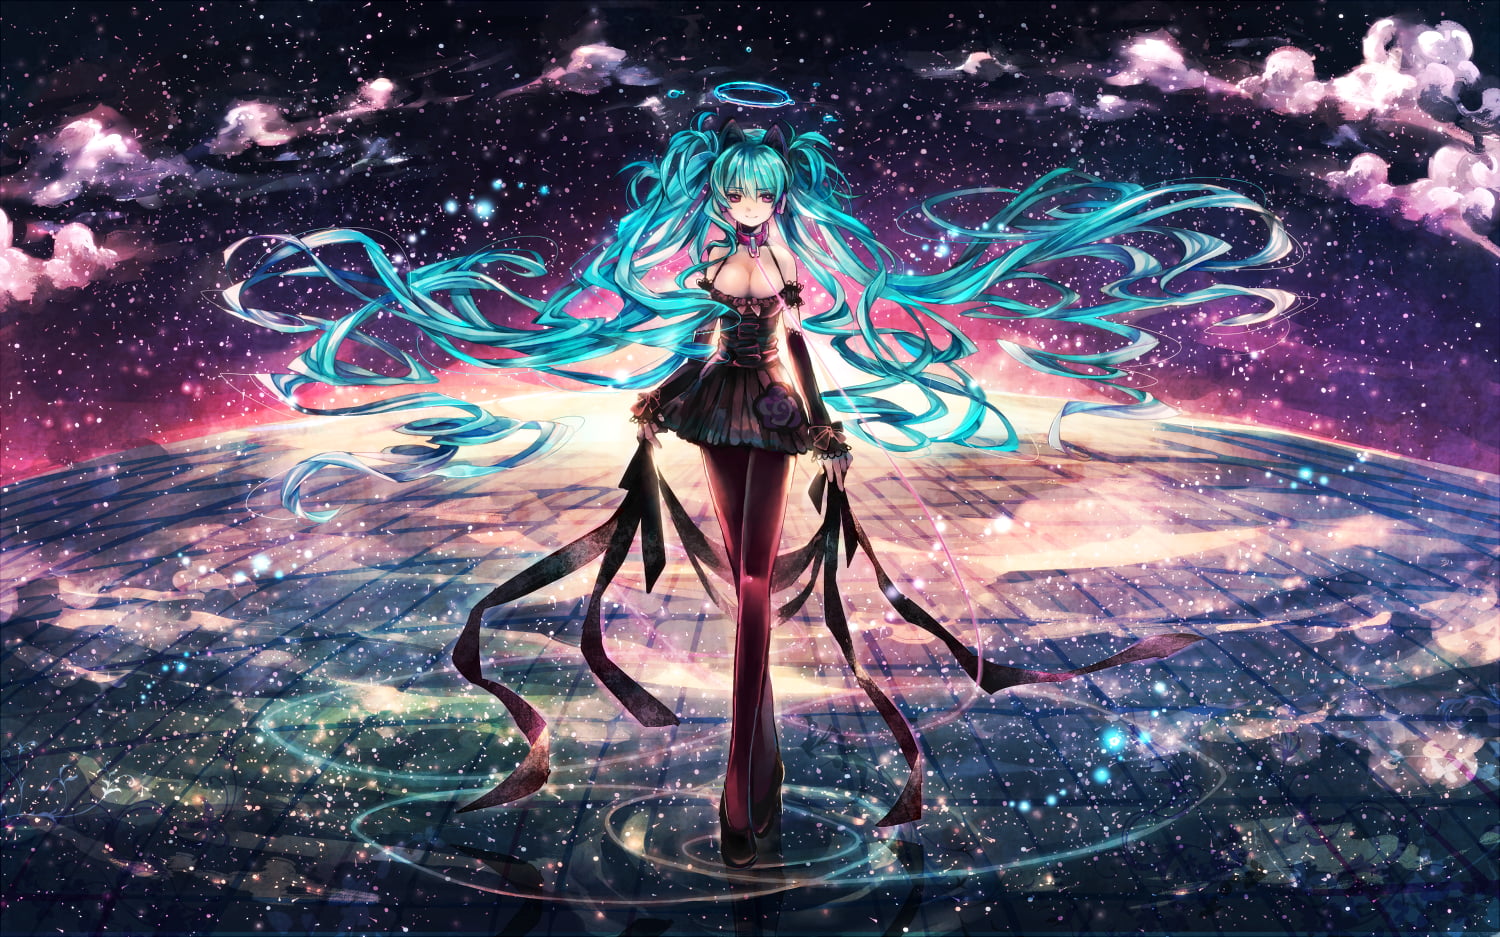 teal-haired female anime character digital wallpaper, blue haired anime character digital wallpaper